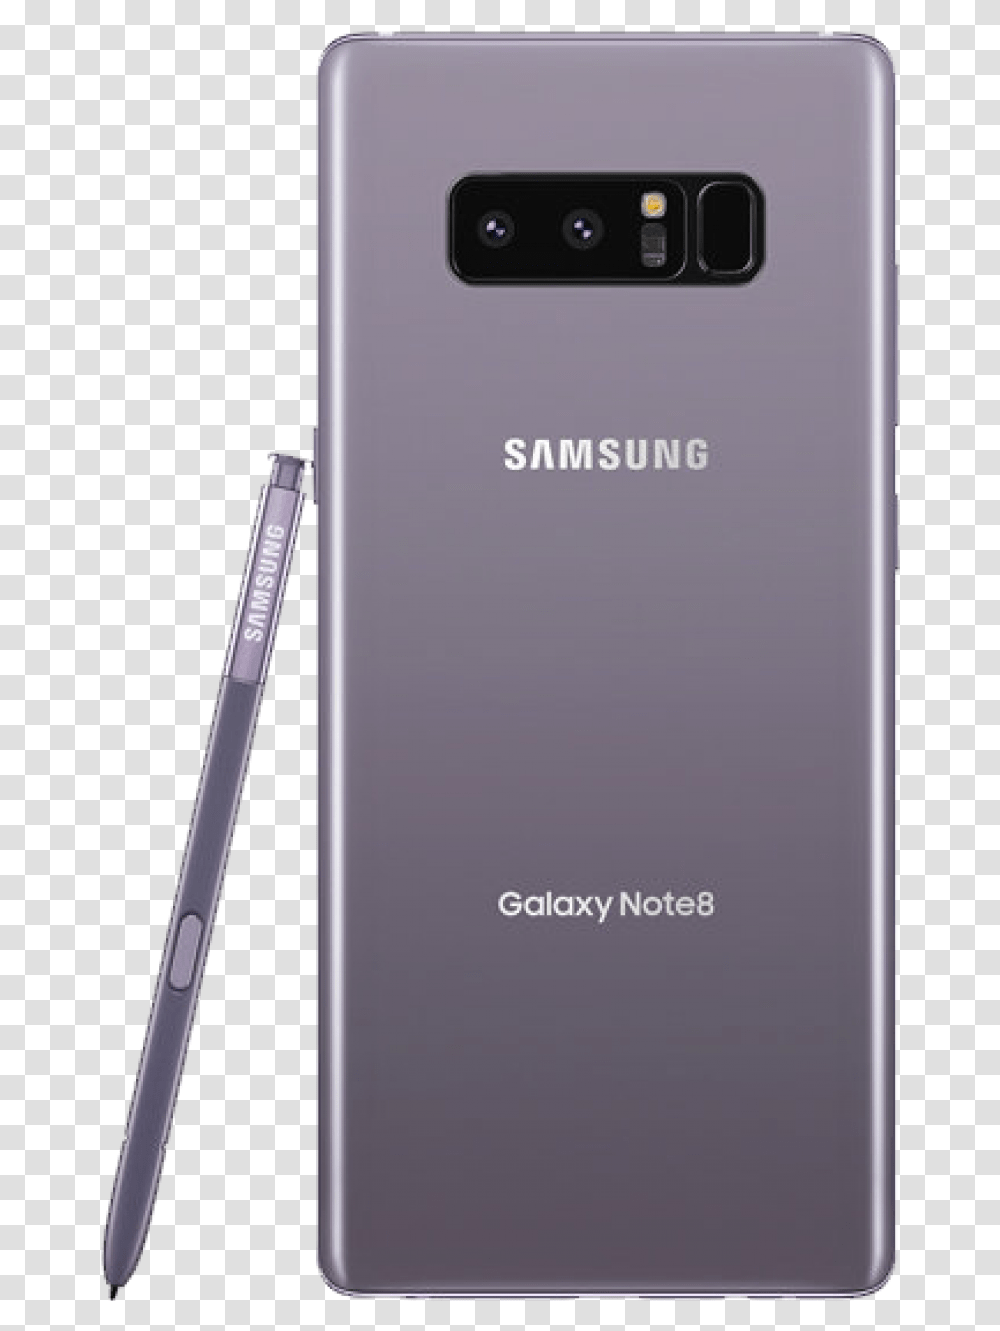 Samsung Galaxy Note8 Dual Sim Sm N9500 Download Smartphone, Mobile Phone, Electronics, Cell Phone, Iphone Transparent Png